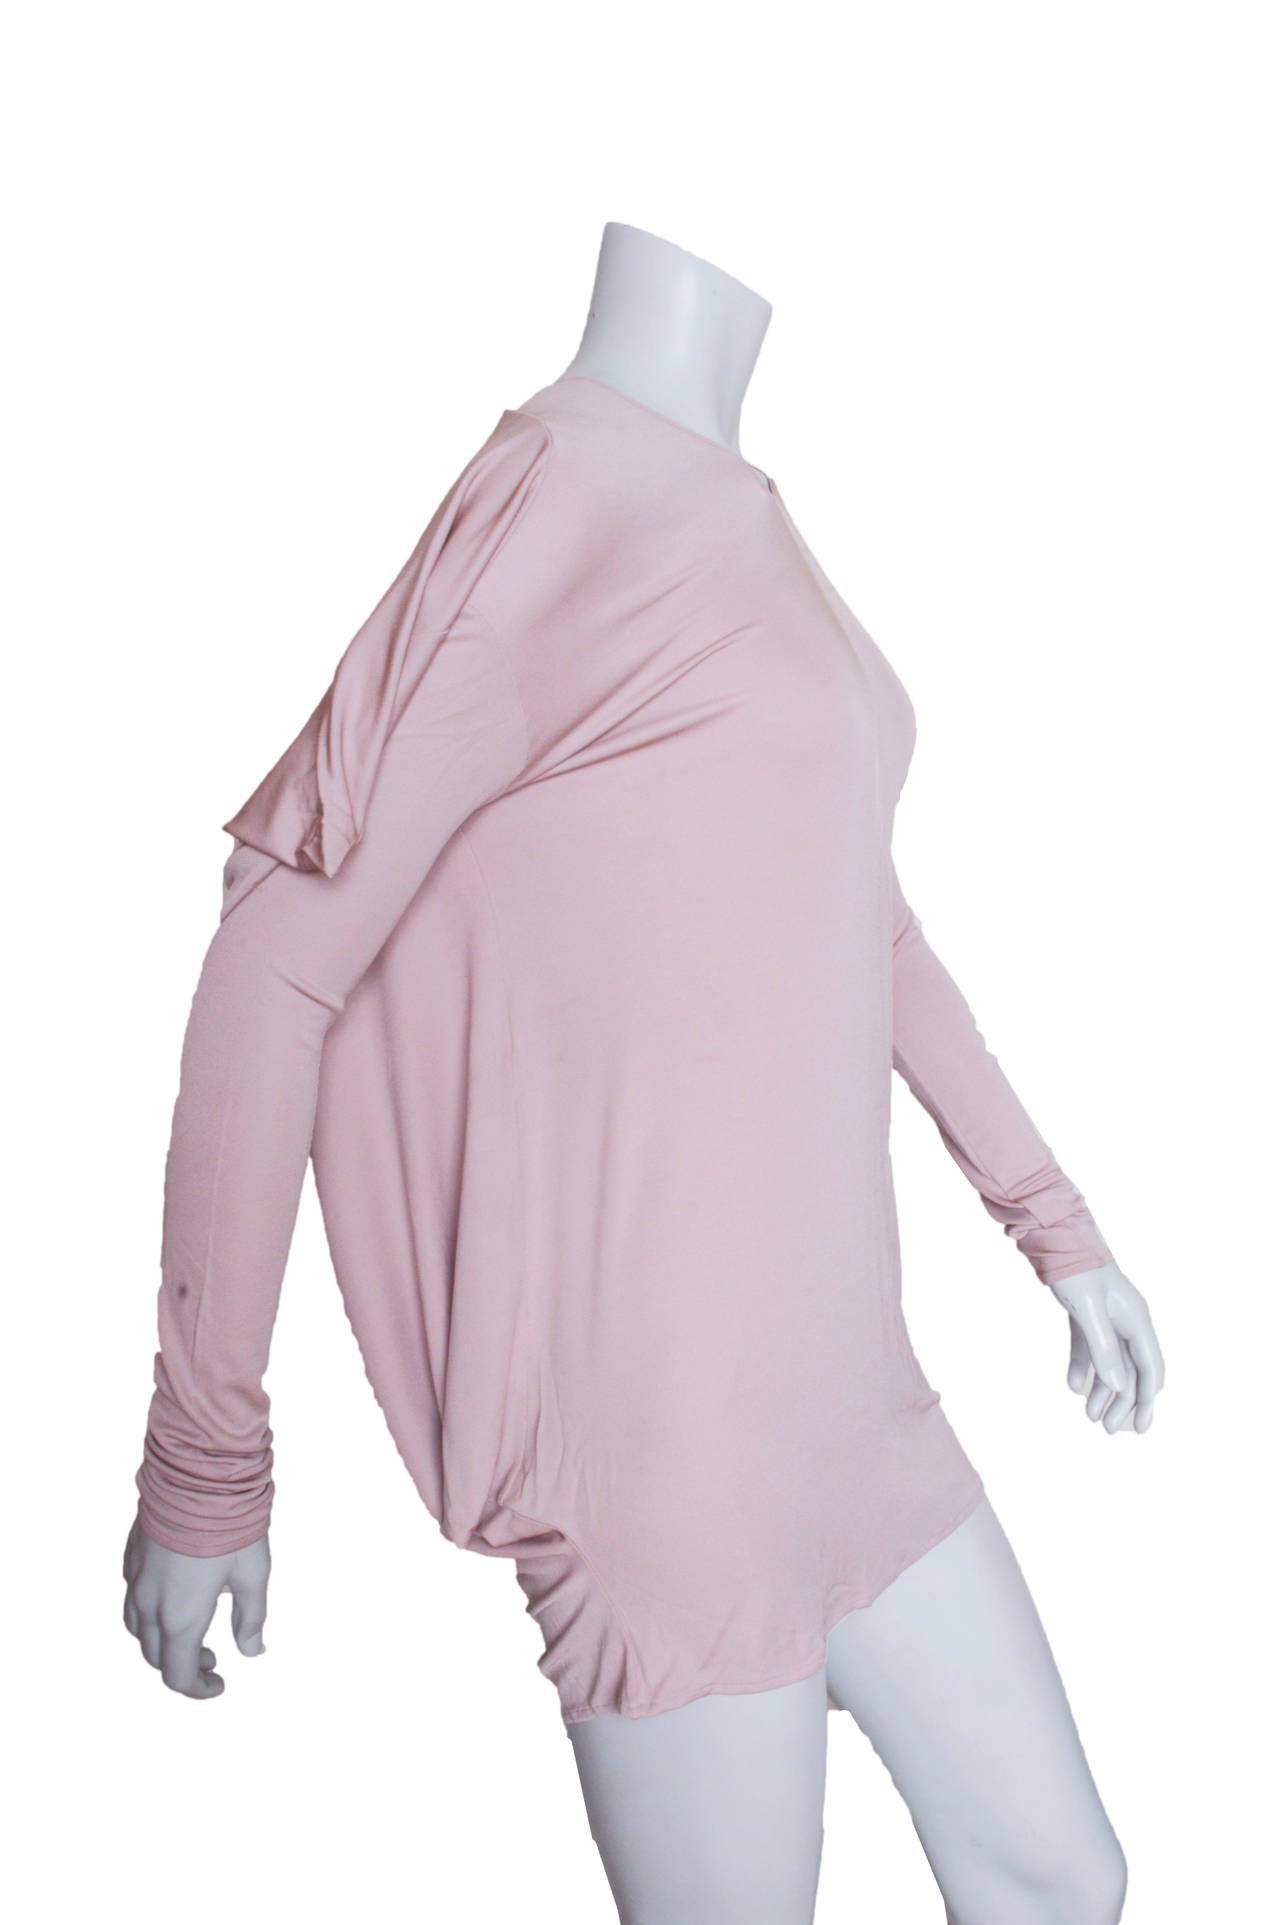 Maison Martin Margiela Pale Pink top.
Longer tunic length.
Draped shoulder to back.
Stretchy jersey hugs hips.
Exaggerated sleeve length.